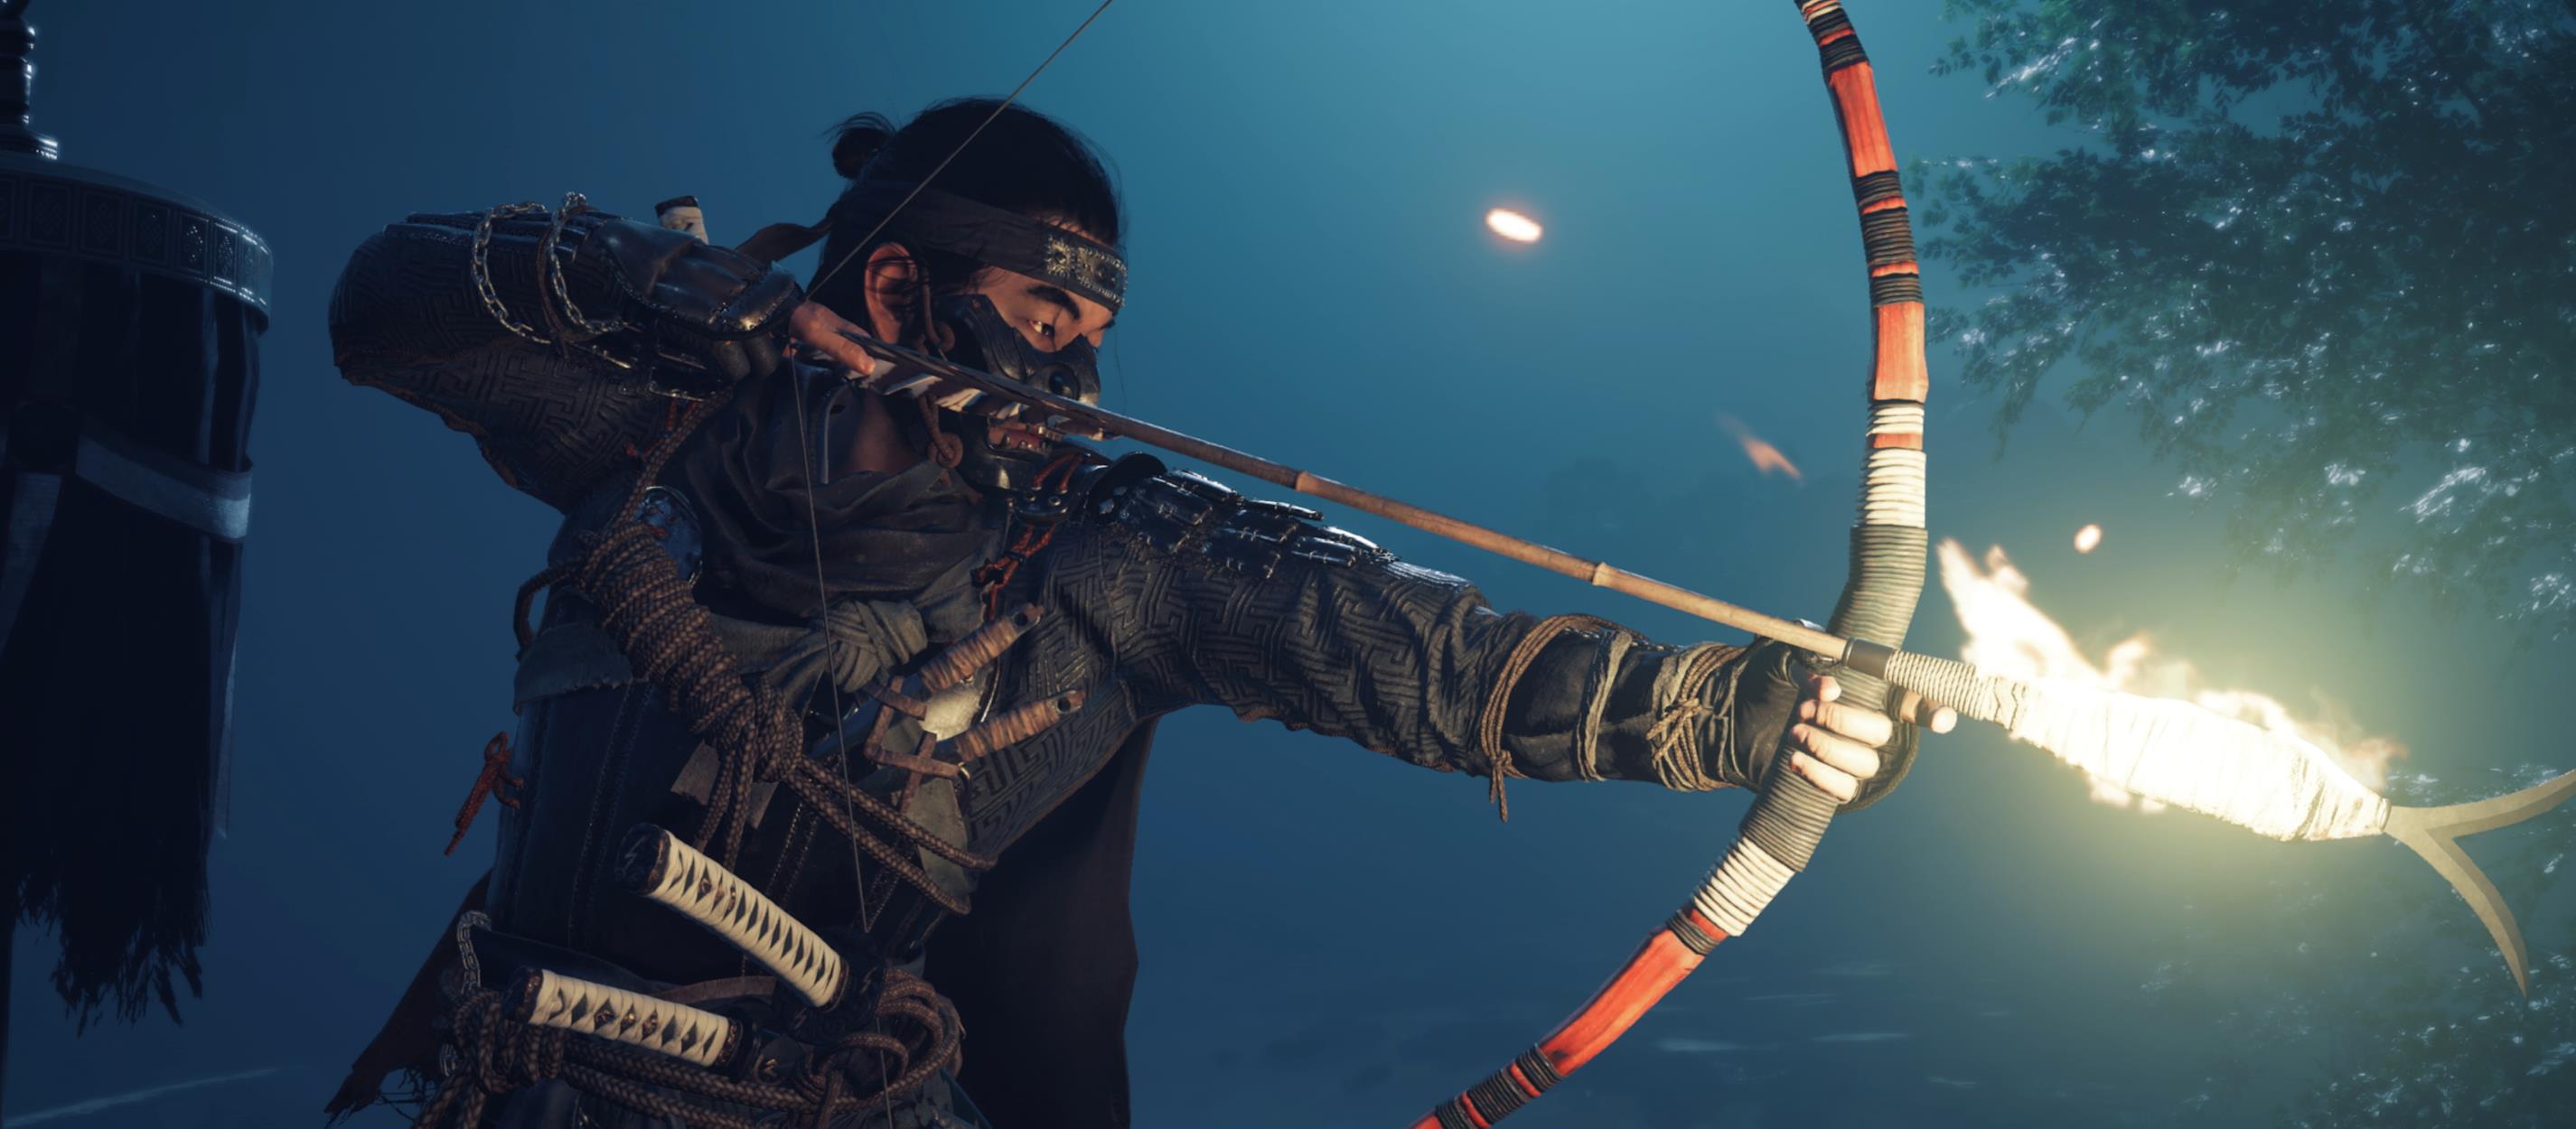 Image for New Sucker Punch job openings suggest a Ghost of Tsushima sequel is in the works